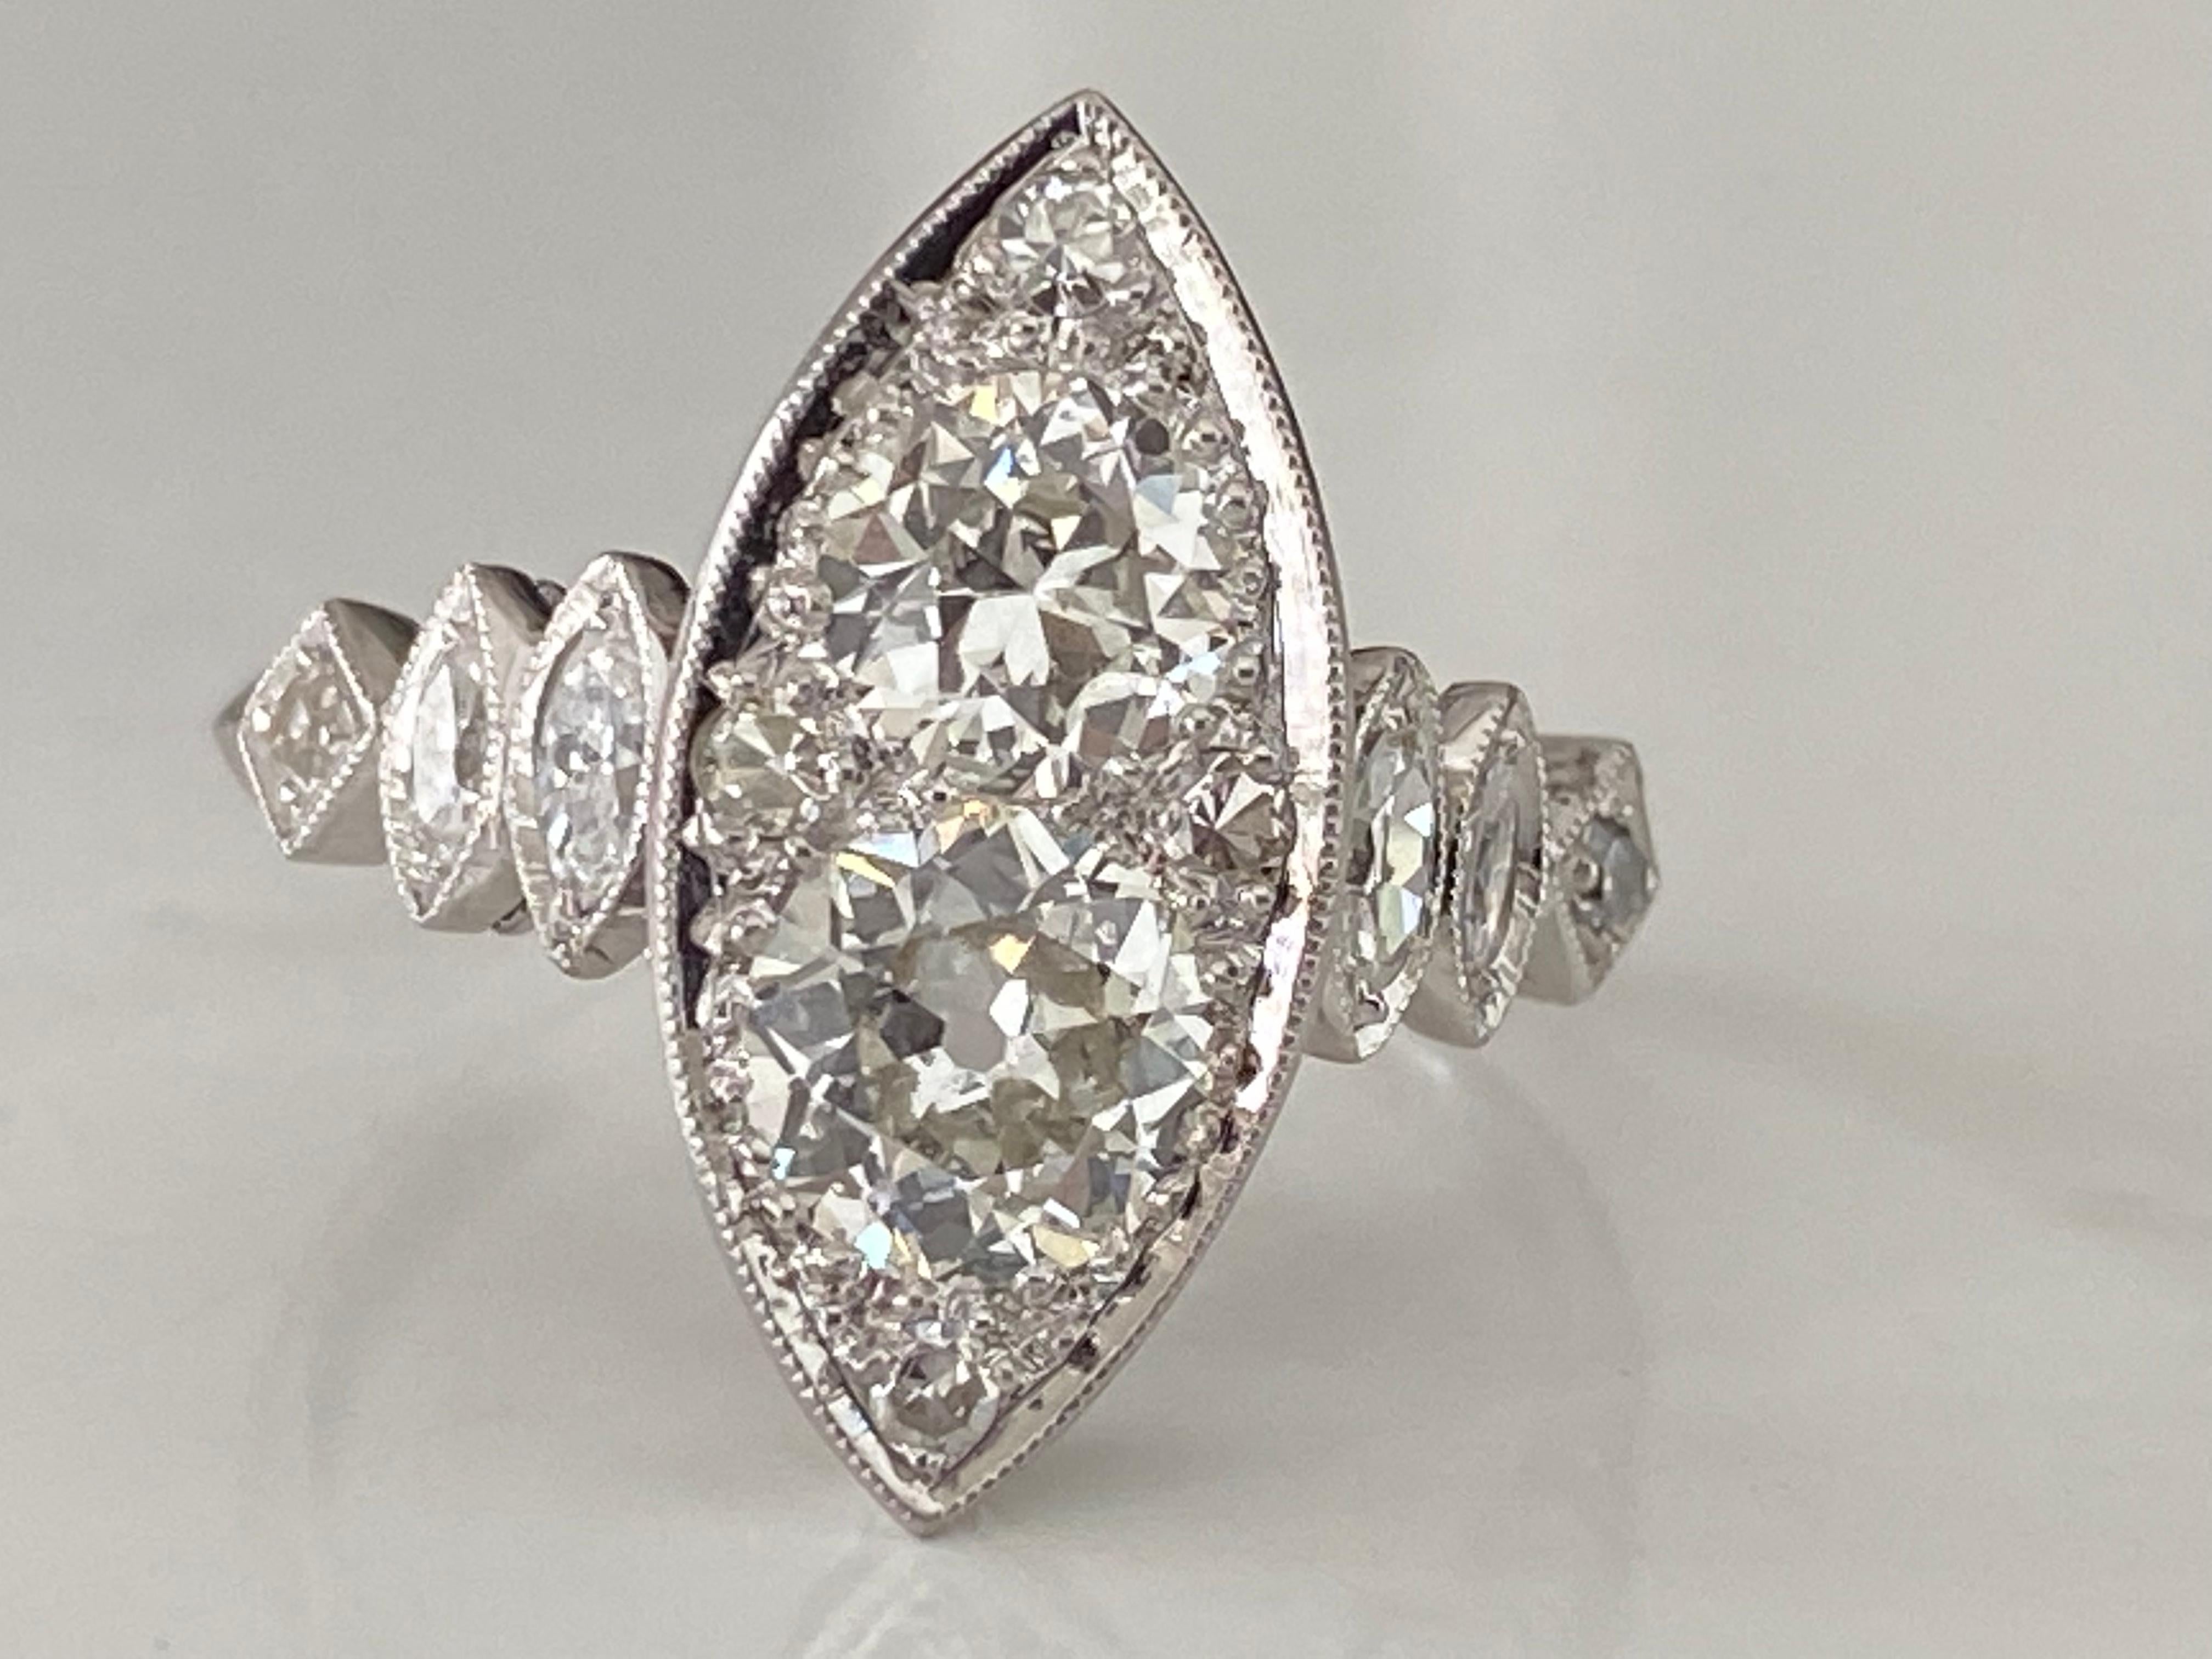 This Art Deco gem handcrafted in platinum features two sparkling Old European cut diamonds totaling approximately 1.30 carats glistening from the center of a navette shape background studded with four single cut diamonds. Four antique marquise